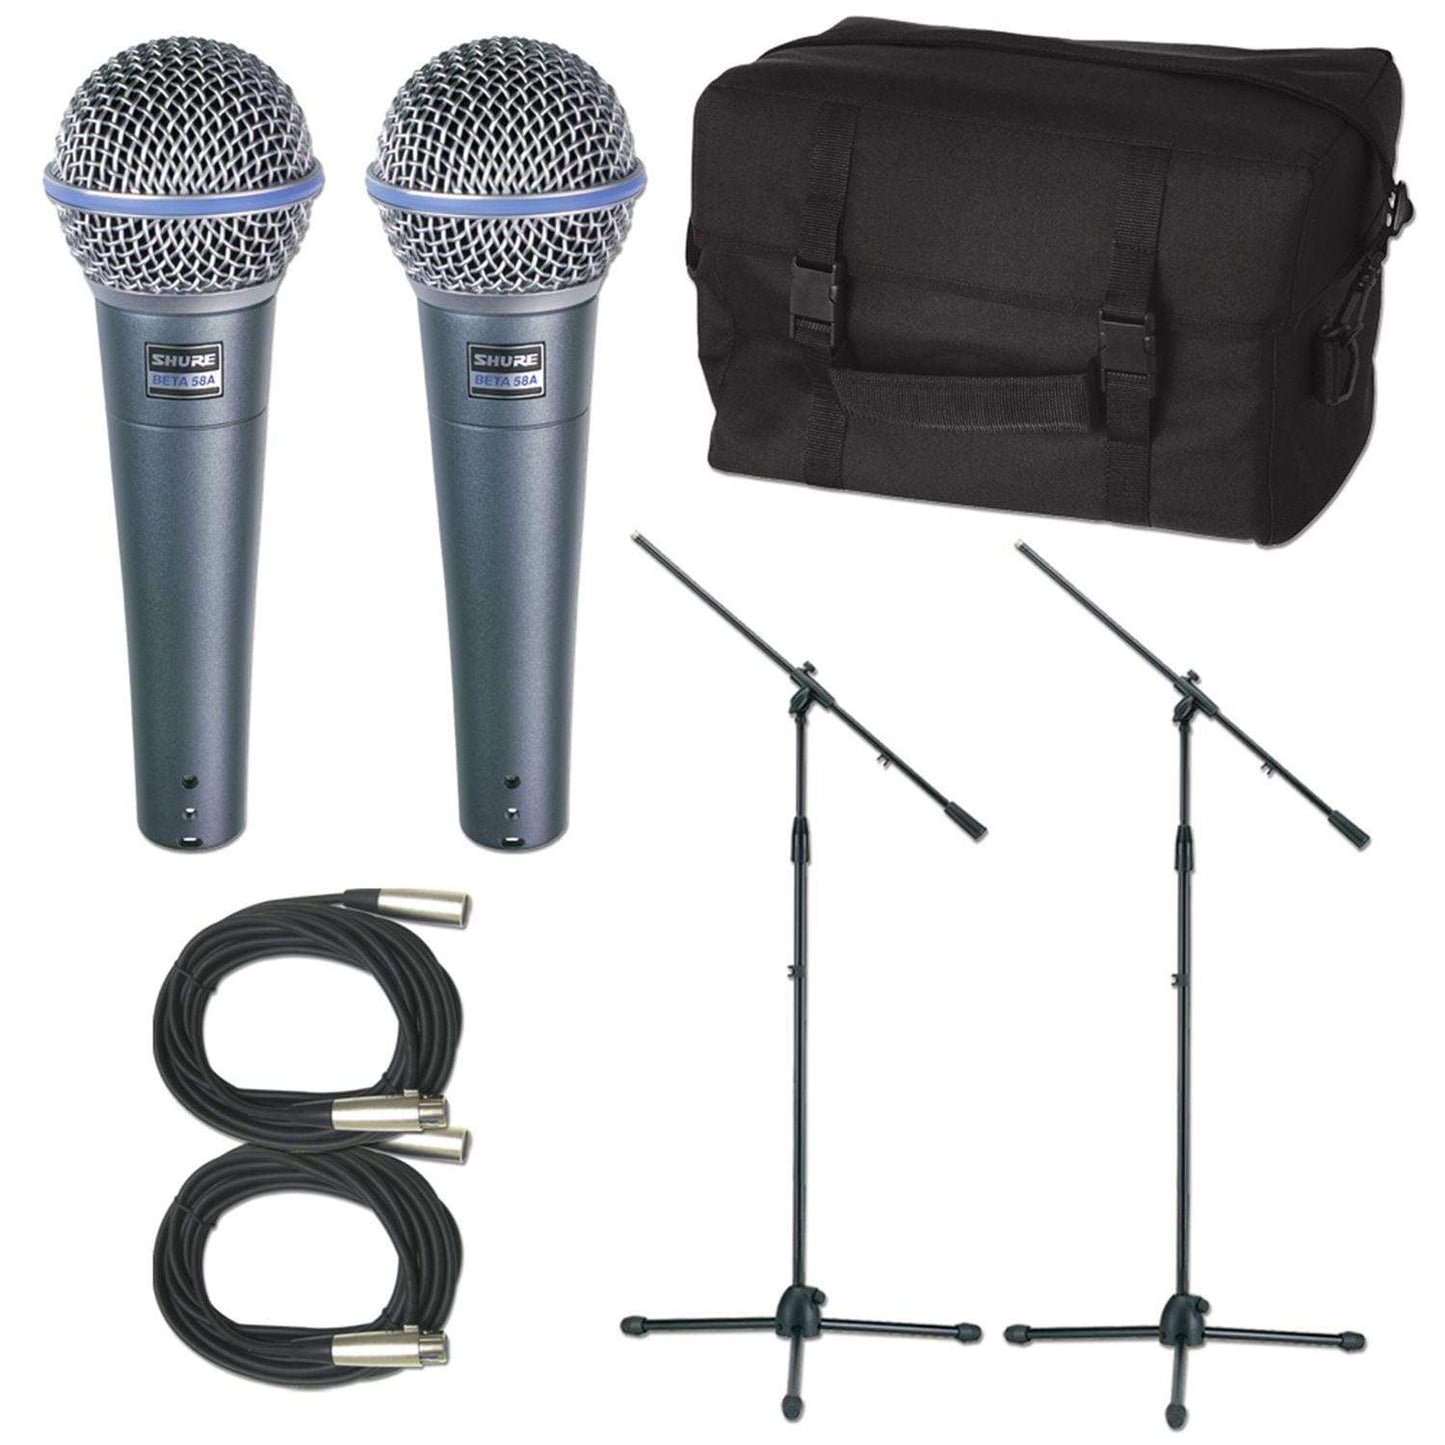 Shure 2 x BETA58A Mic Pack with Stands Cables Bag - ProSound and Stage Lighting